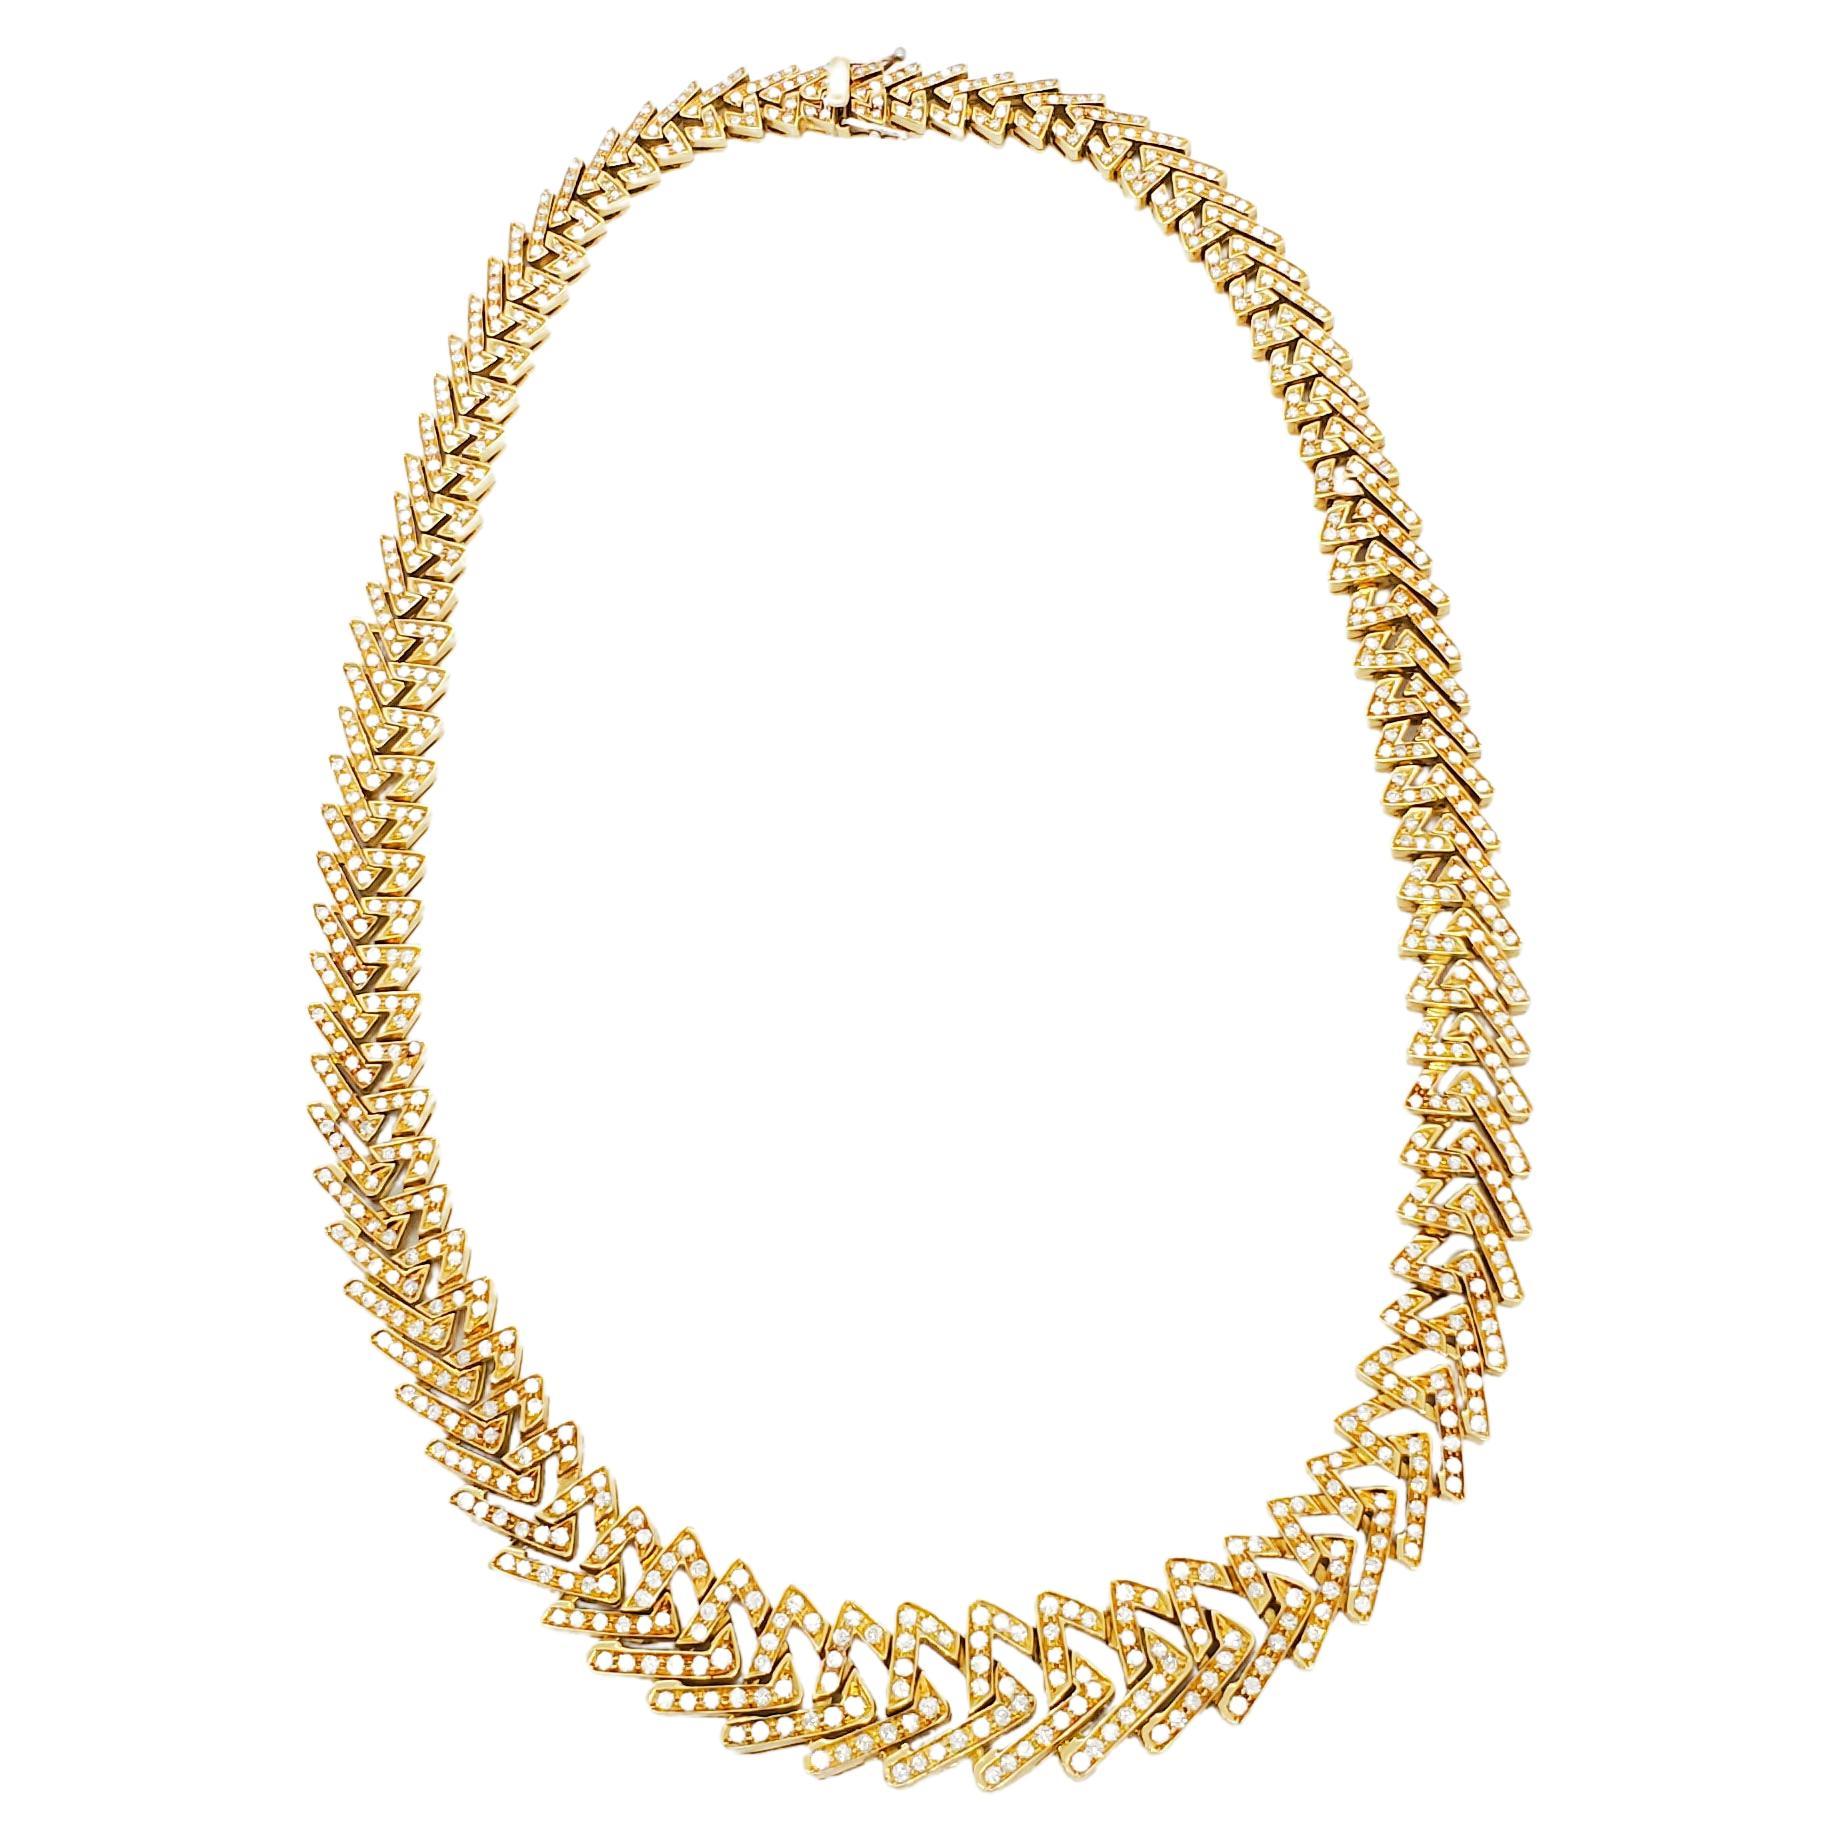 White Diamond and 18k Yellow Gold Necklace